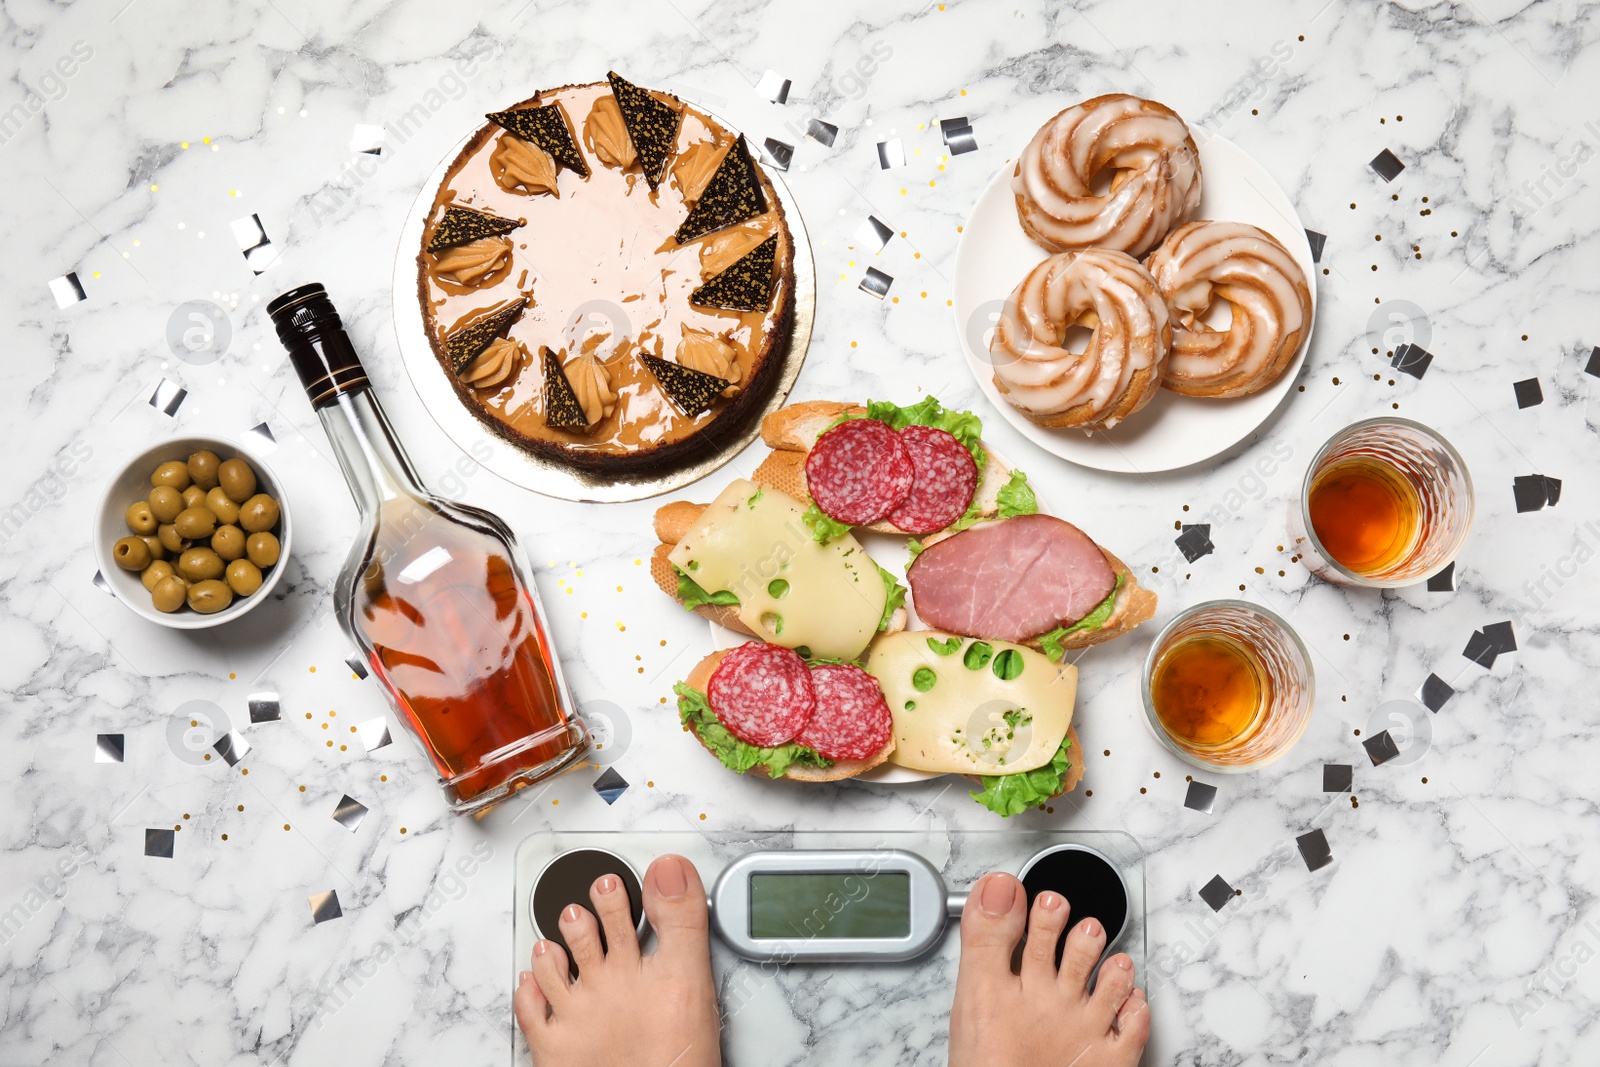 Photo of Woman using scale surrounded by food and alcohol after party on floor, top view. Overweight problem